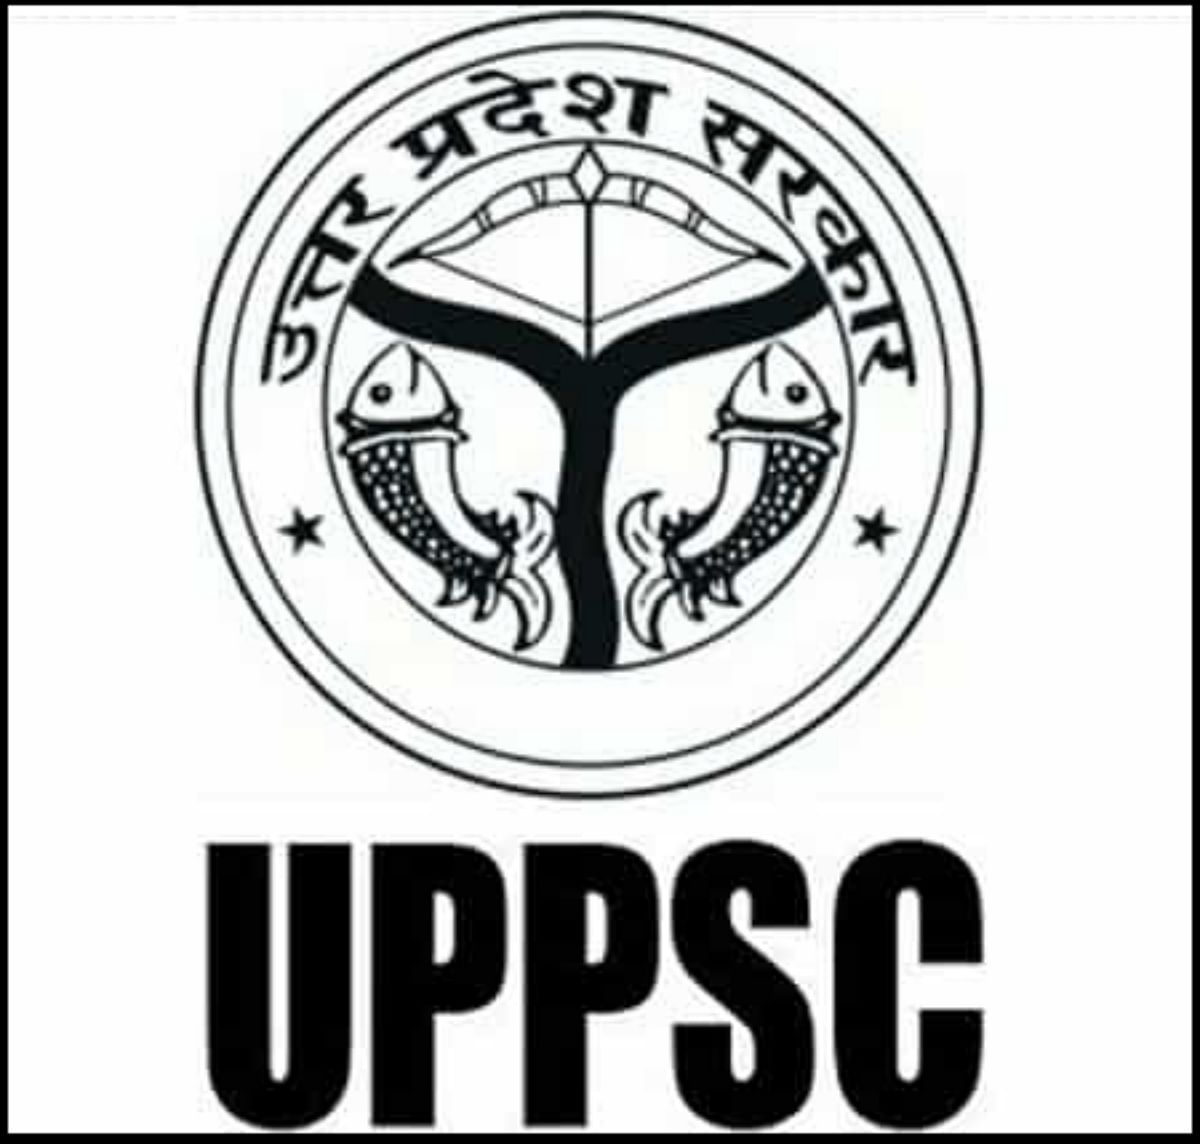 UPPSC Recruitment 2020: Applications are invited for 328 Posts, Postgraduates can Apply